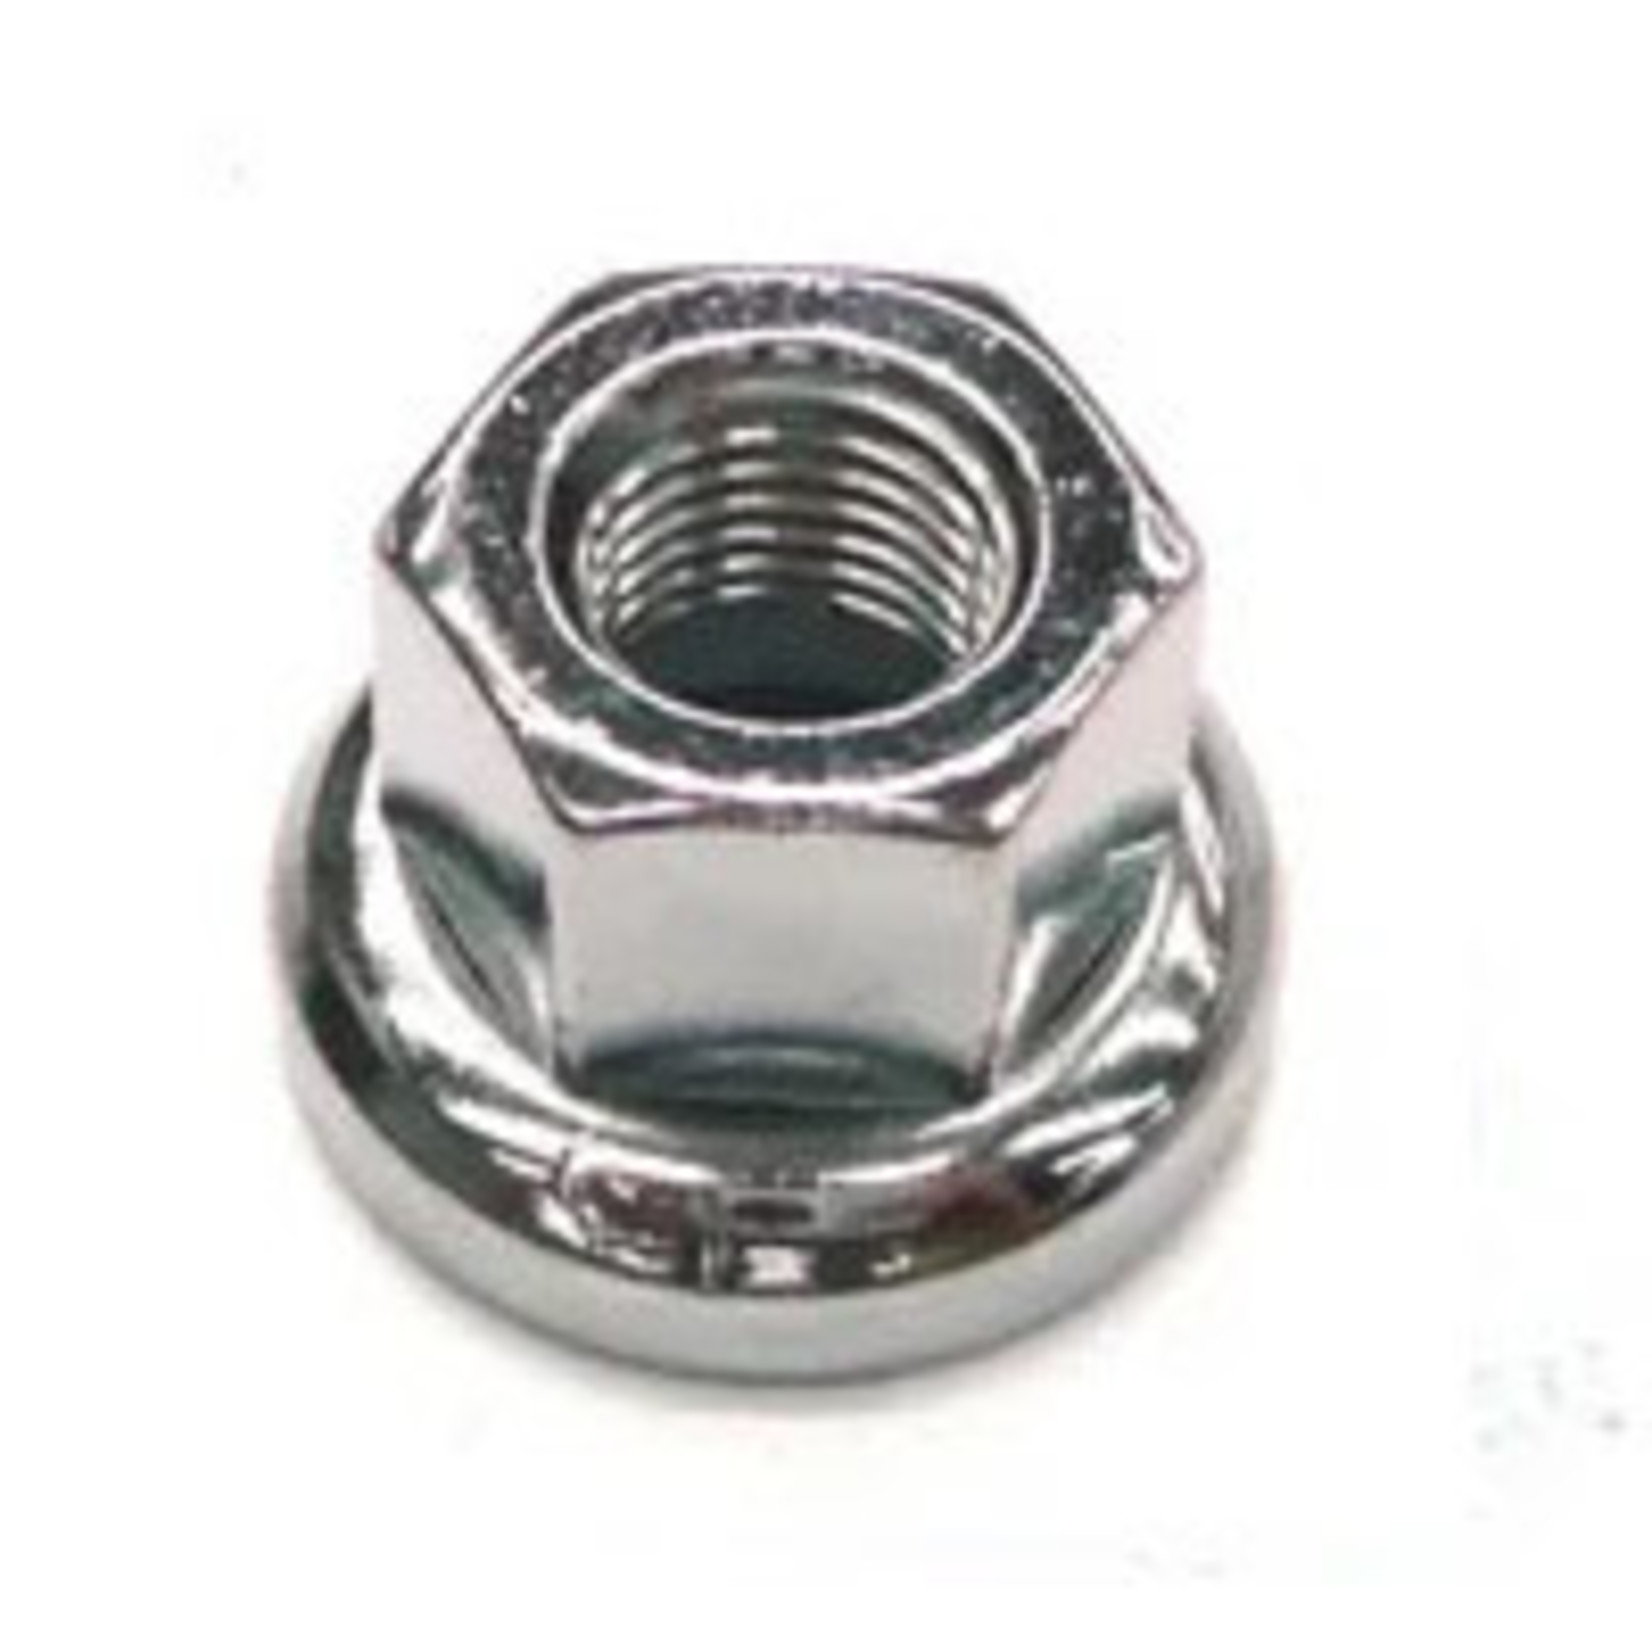 Incomex Trading Pty Ltd BPW Bike/Cycling Track Nut - 9mm - Integrated Washer C.P